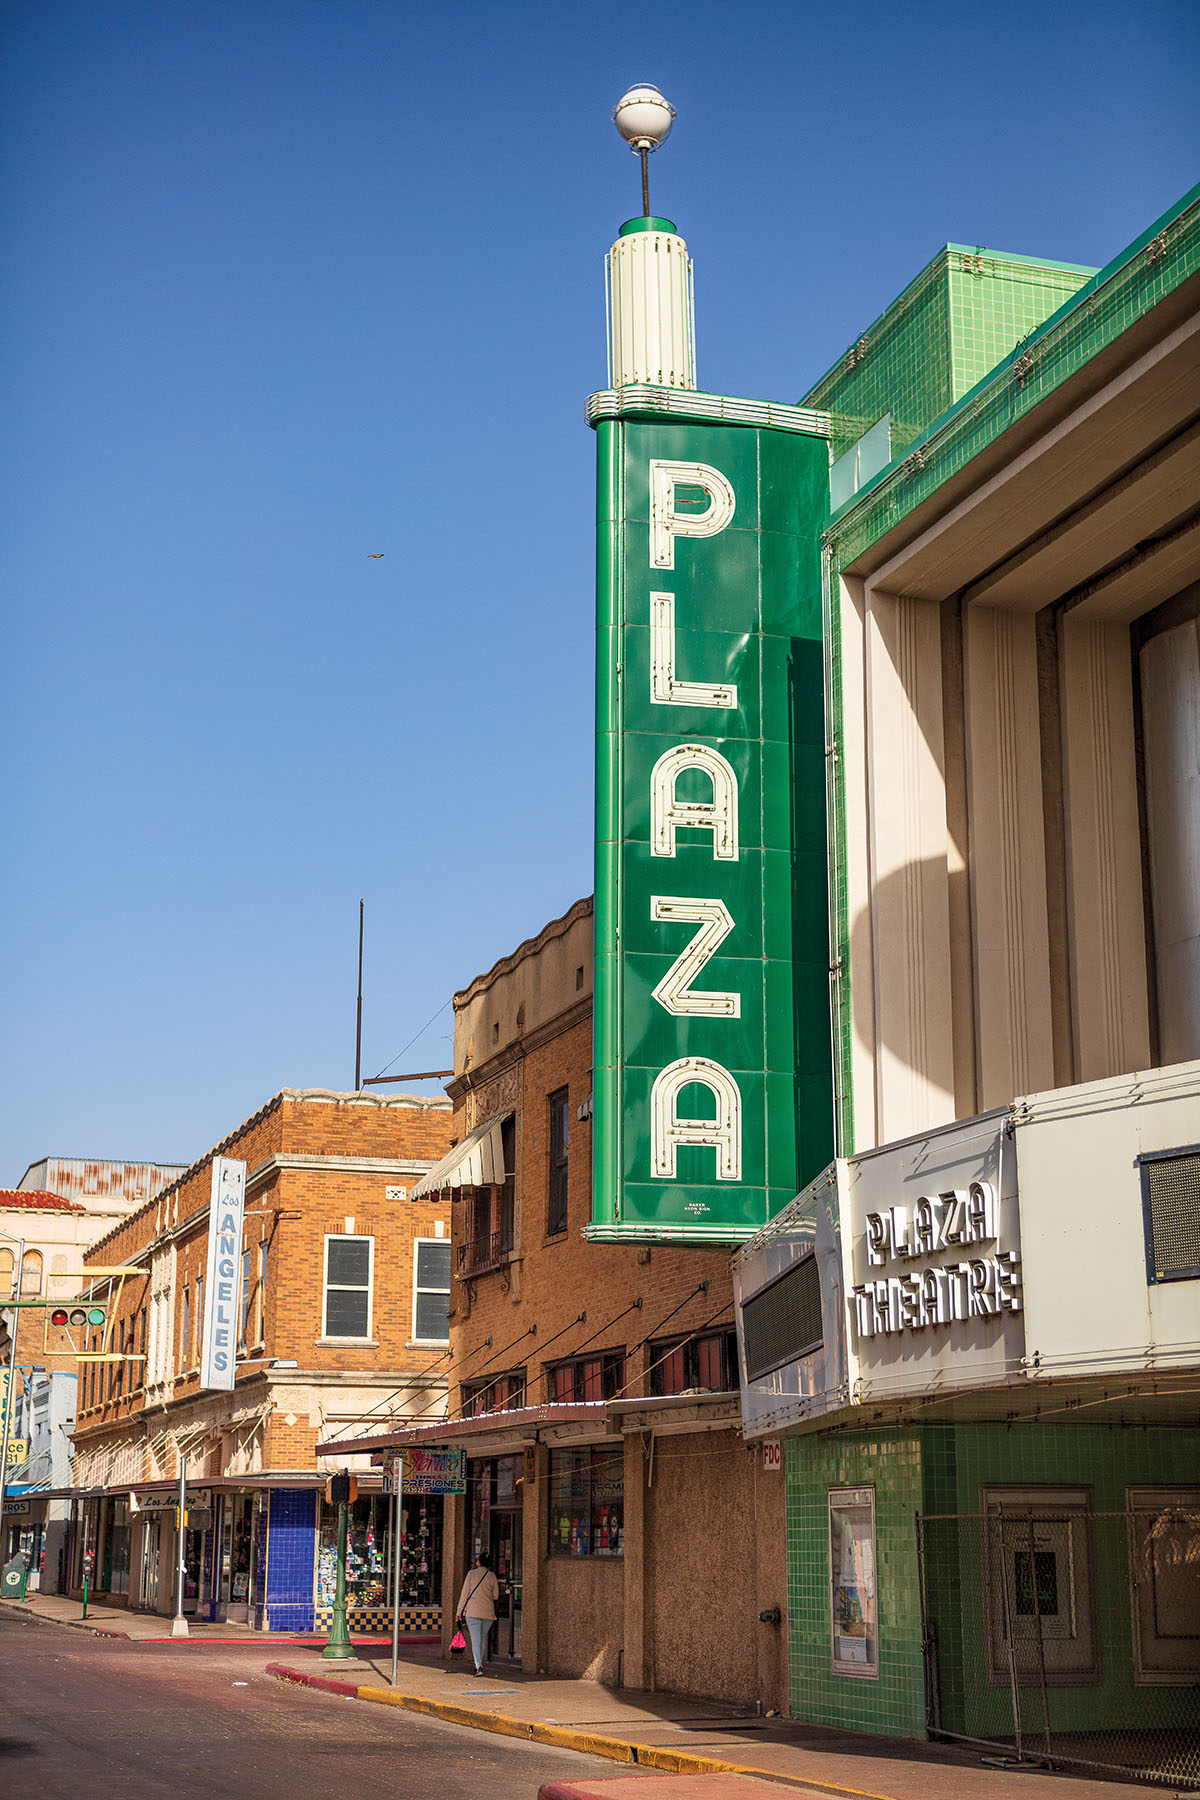 The outside of a brick theater with a large green sign reading 